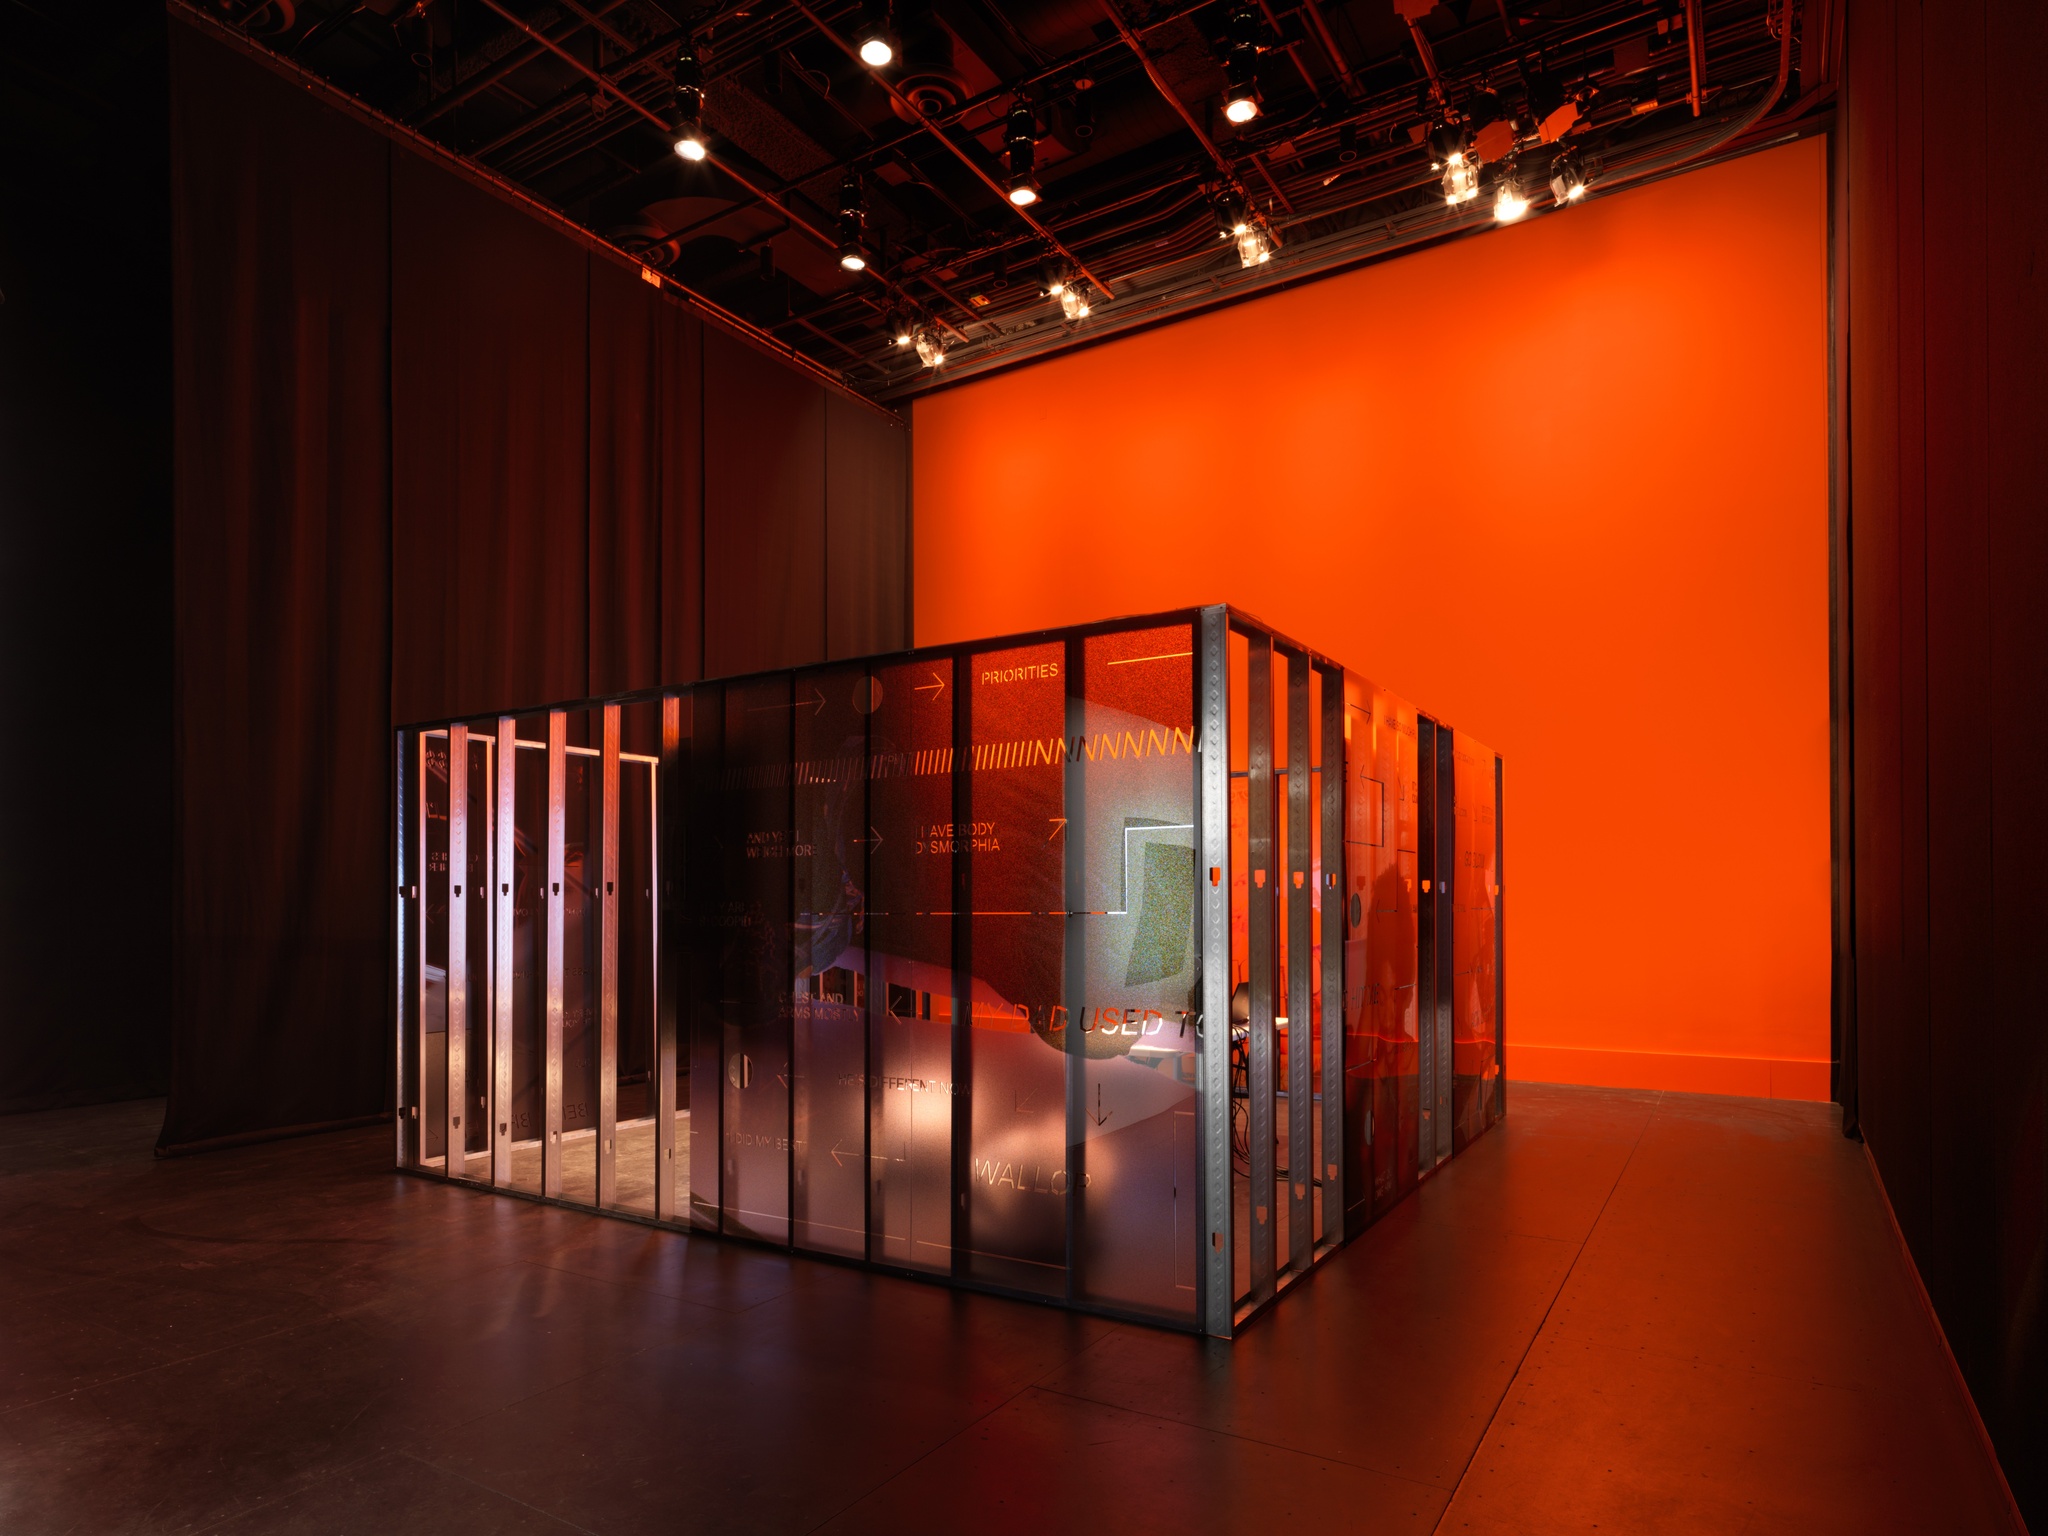 A view of an art installation by Martine Syms of the steel framework of a room's walls against a bright orange background